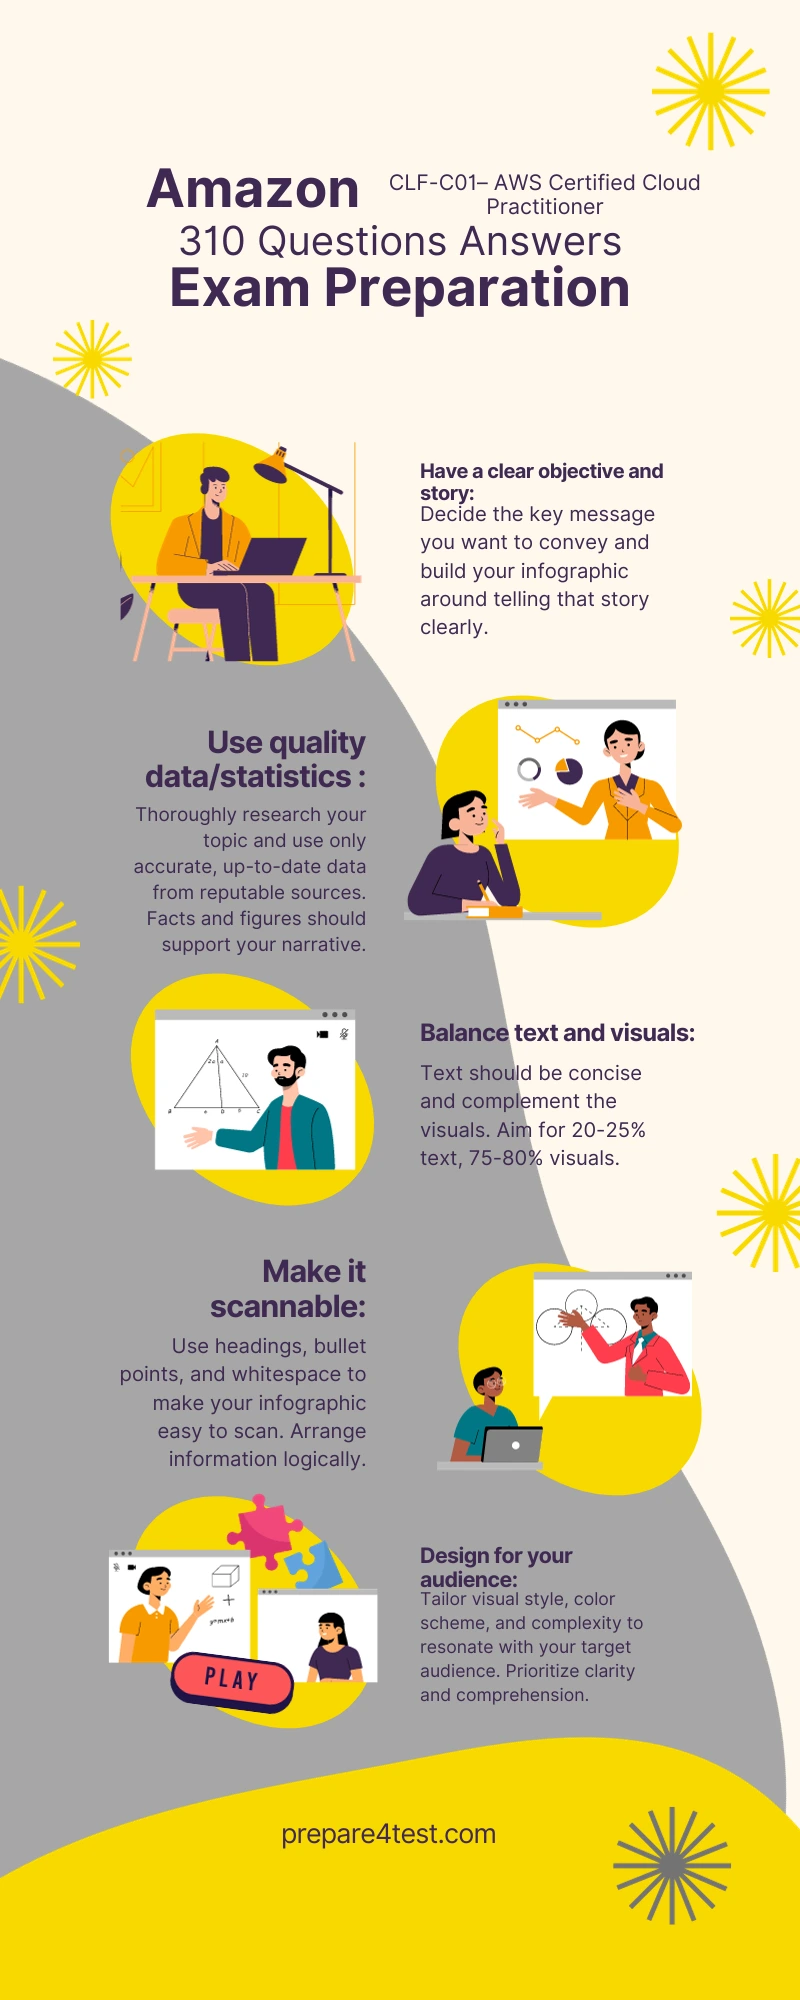 AWS Certified Cloud Practitioner Benefits Infographic